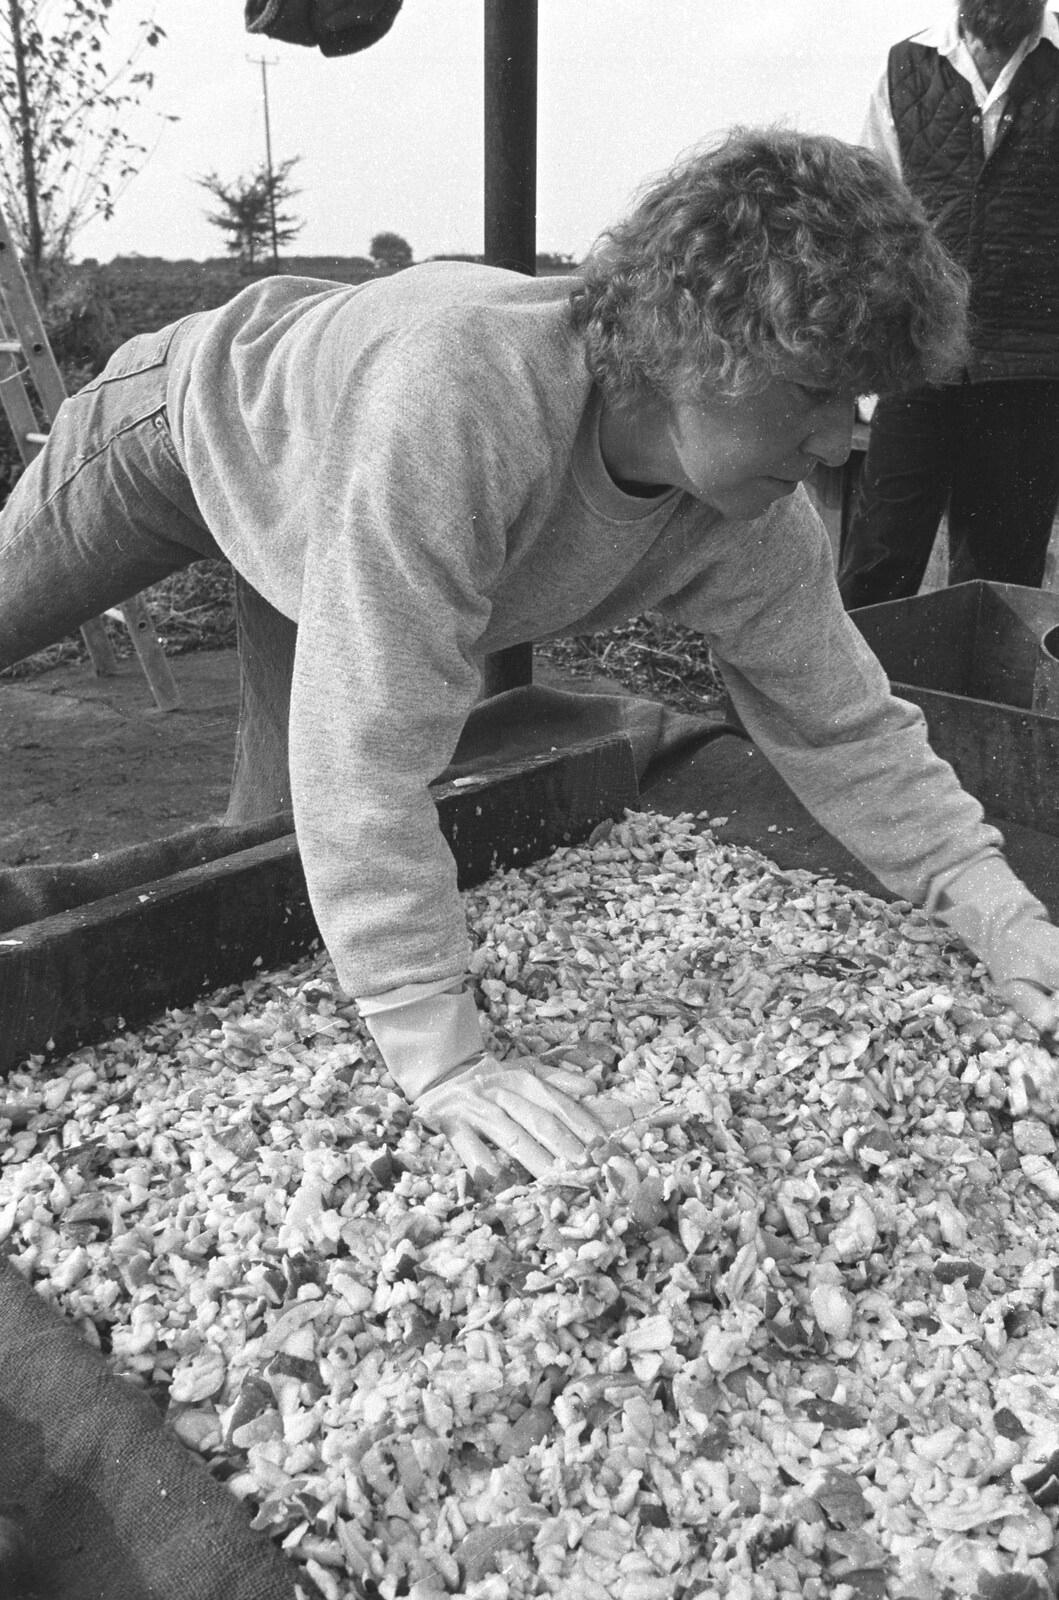 Brenda spreads chopped apple around from Cider Making in Black and White, Stuston, Suffolk - 11th October 1992